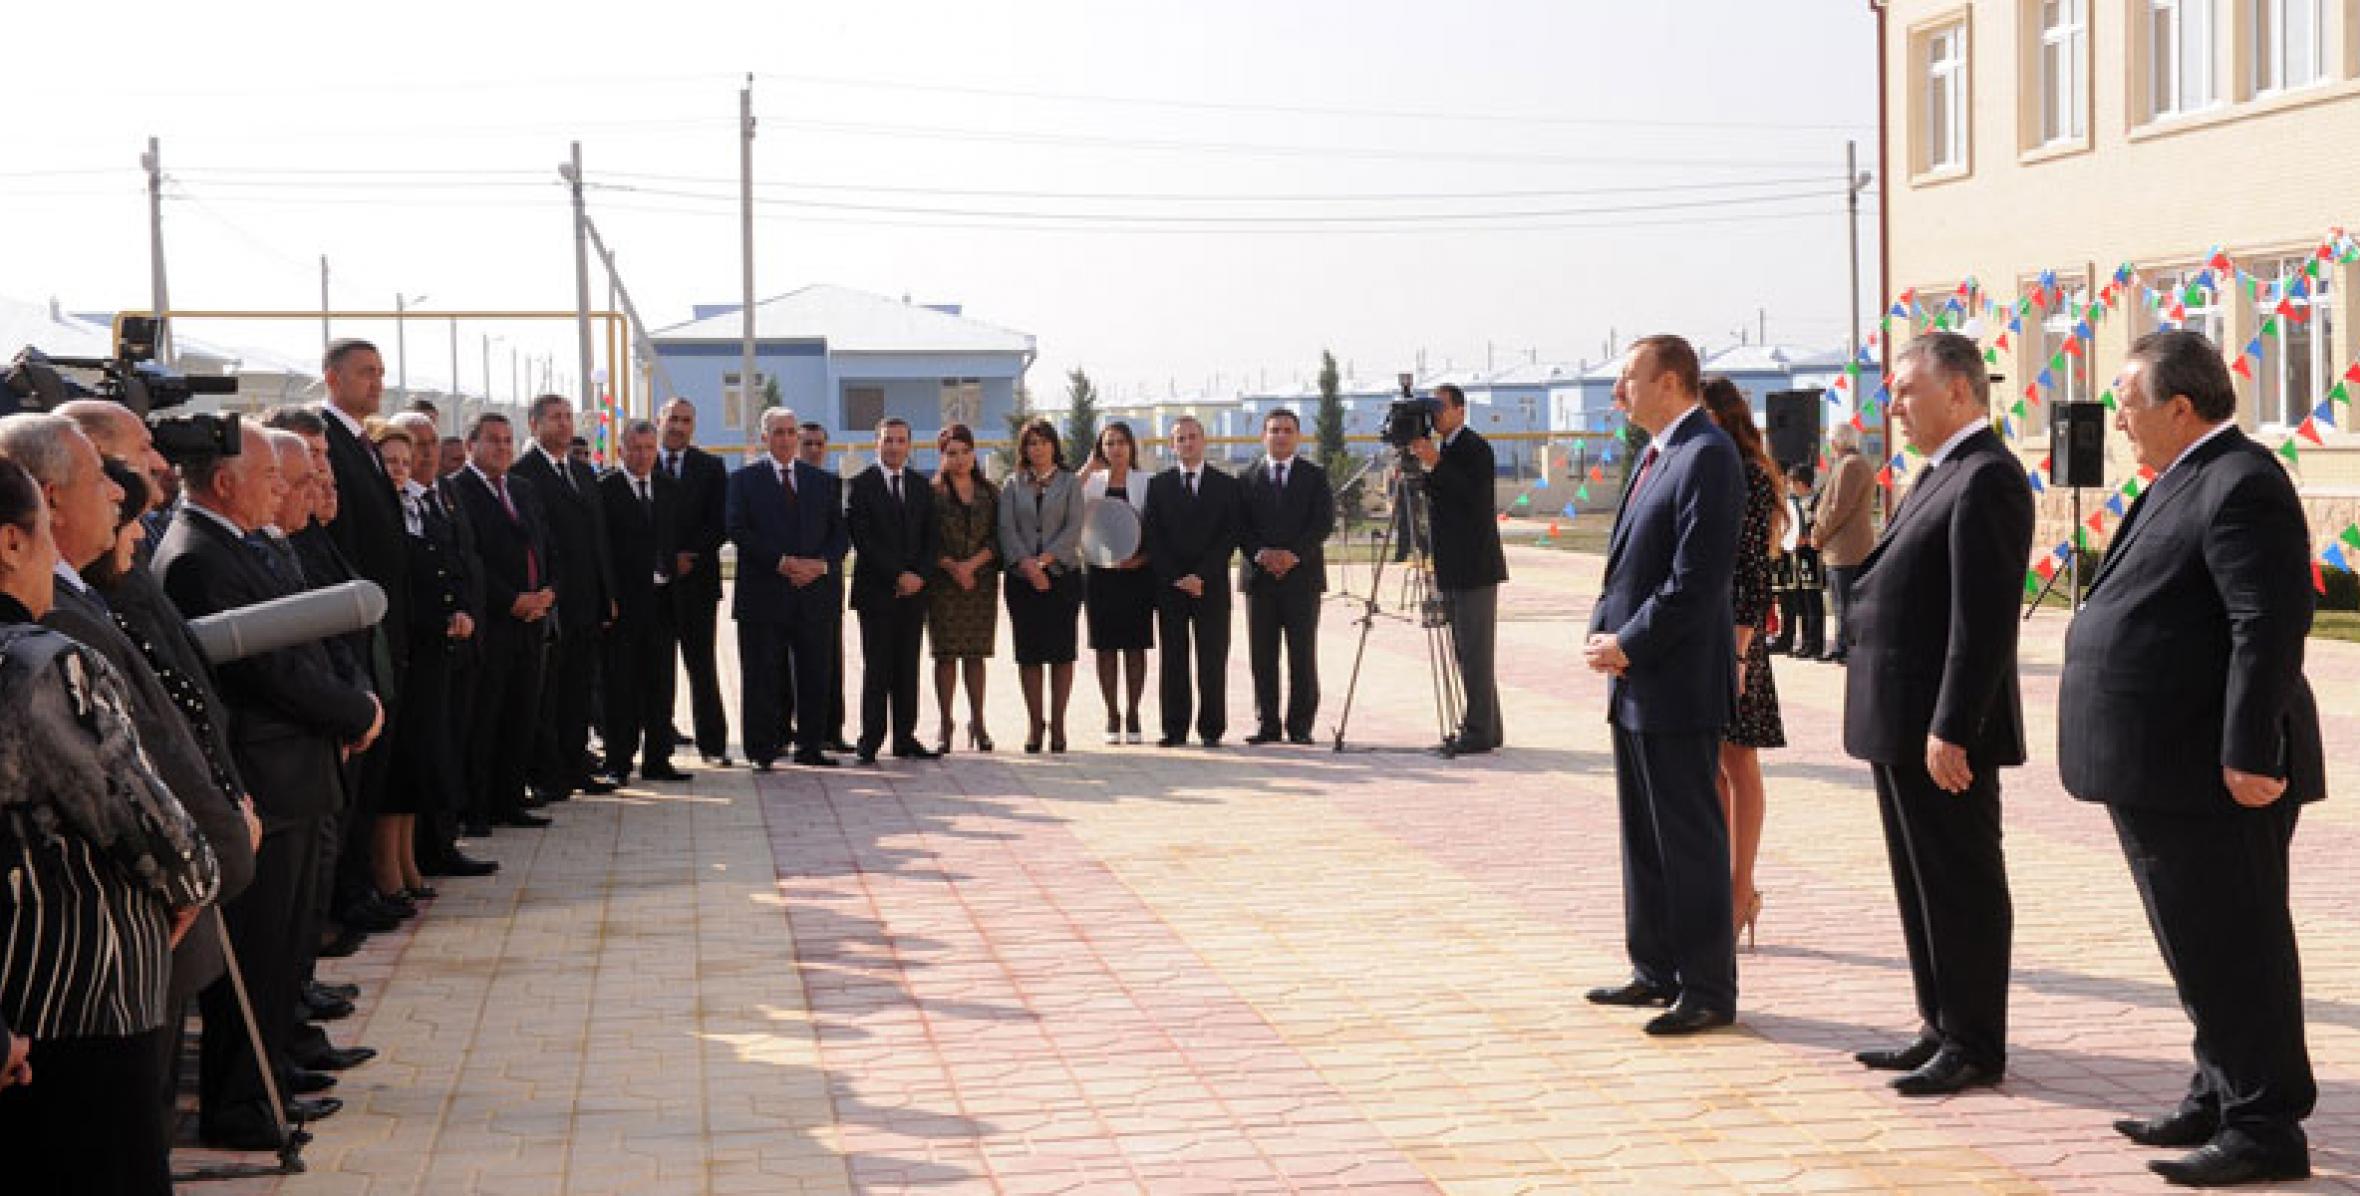 Speech by Ilham Aliyev at the opening ceremony of a new settlement for IDP families in the region of Agdam